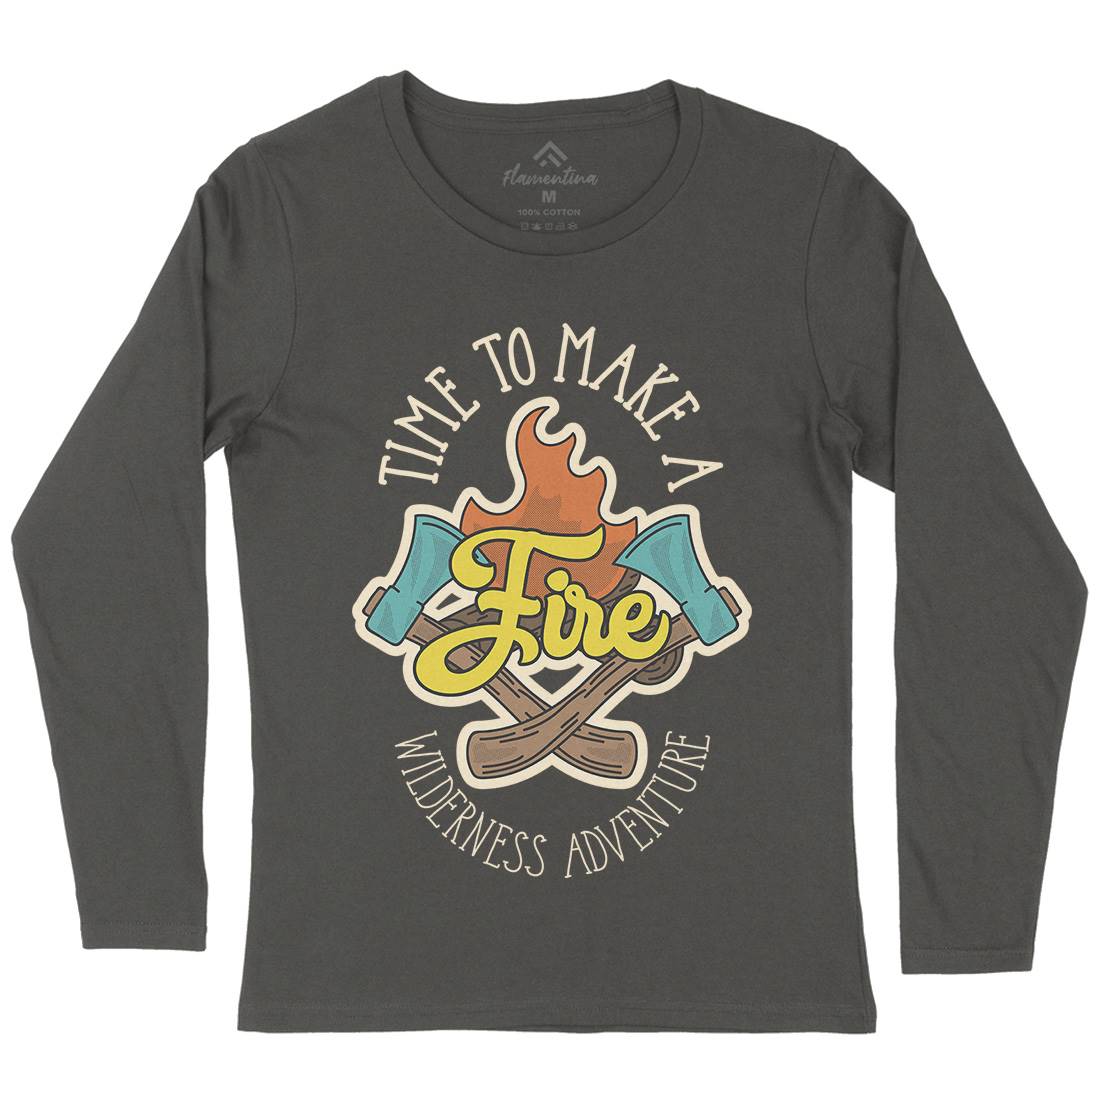 Time To Make Fire Womens Long Sleeve T-Shirt Nature D992